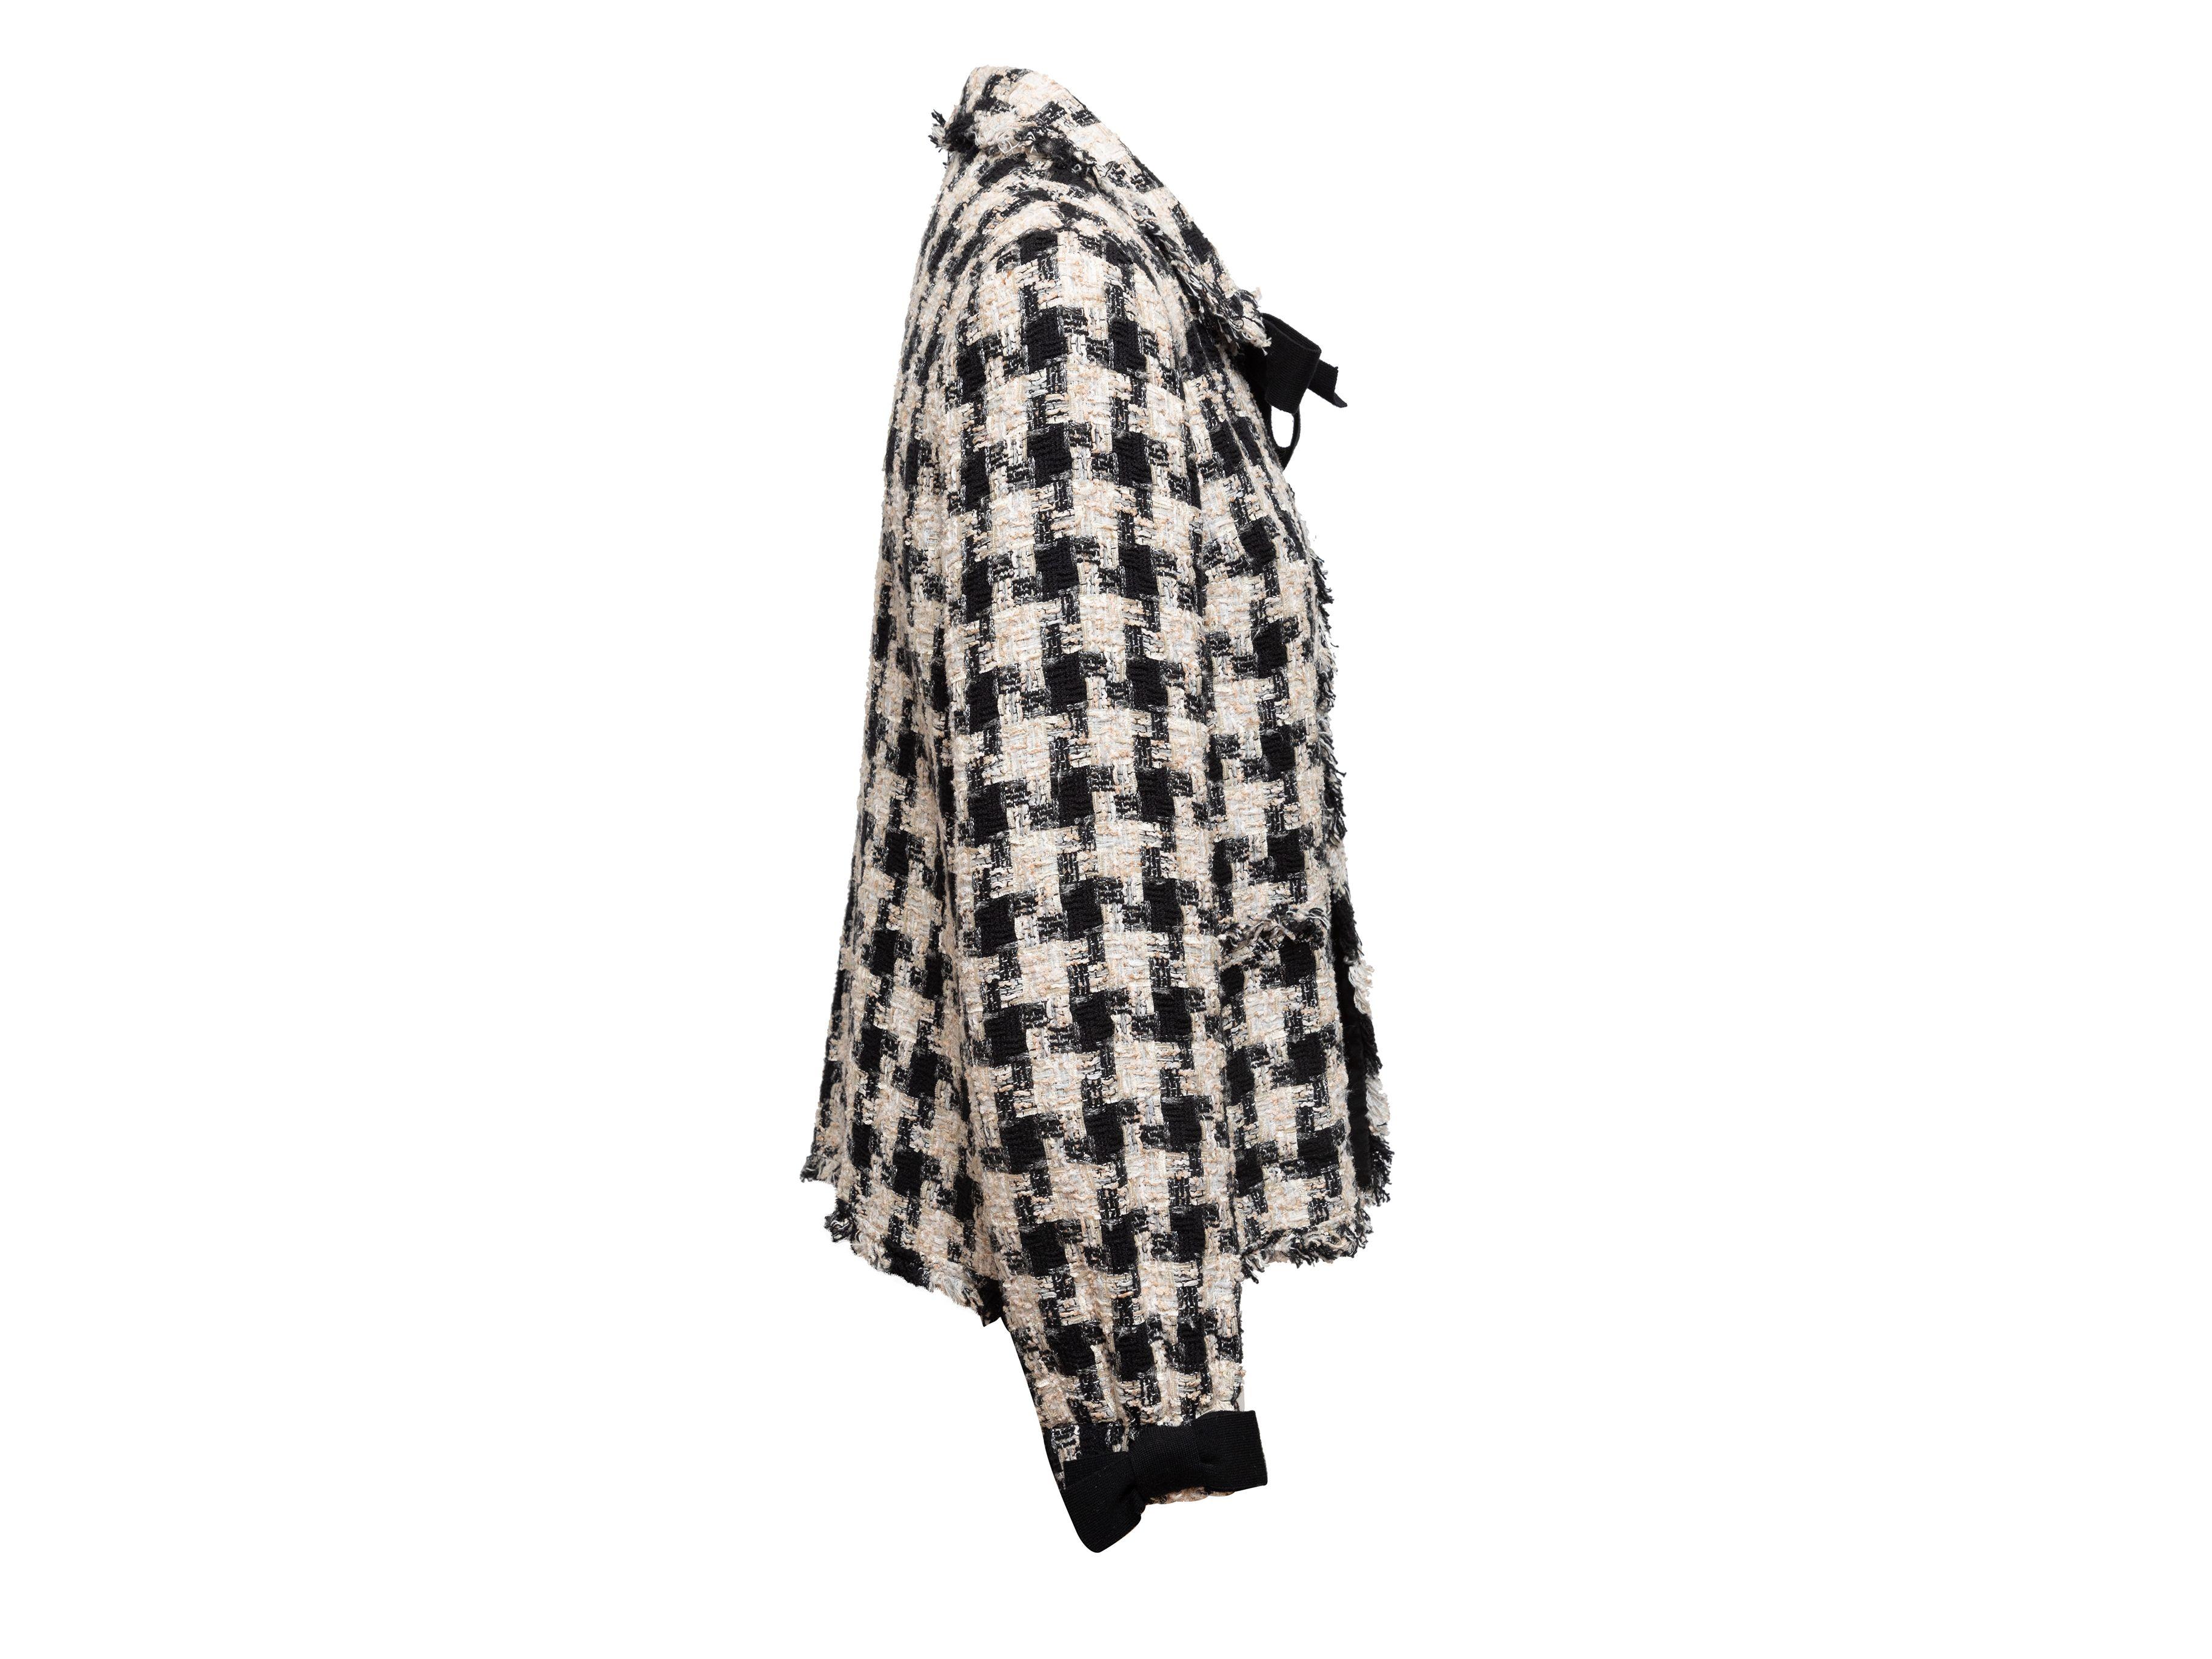 Chanel Fall 2004 Black & White Houndstooth Tweed Jacket 1